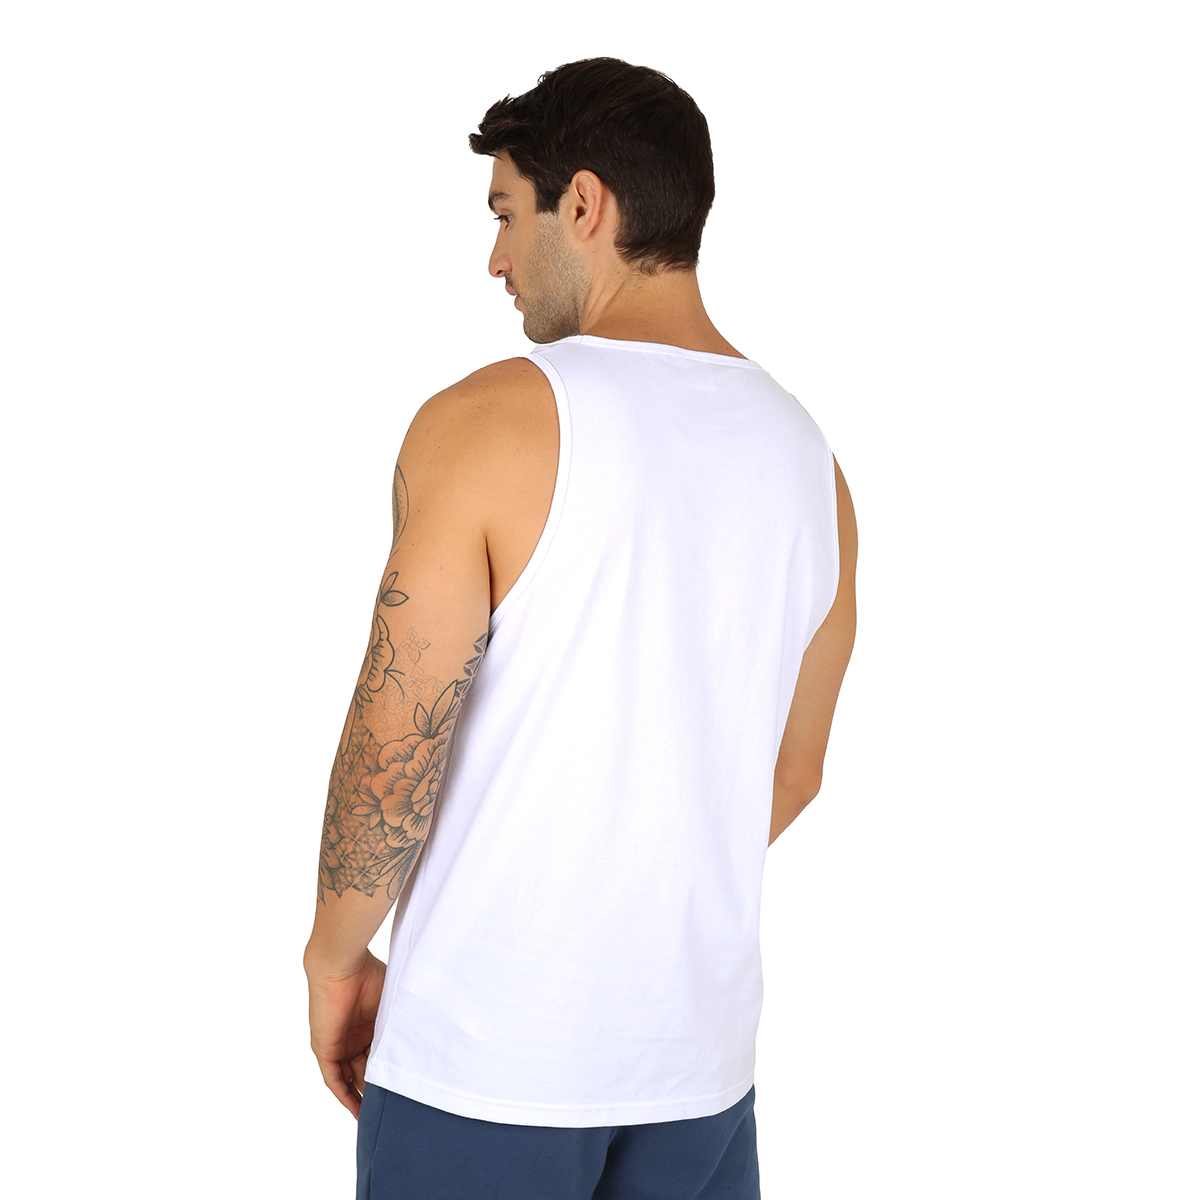 Musculosa Fila Logo Hombre,  image number null